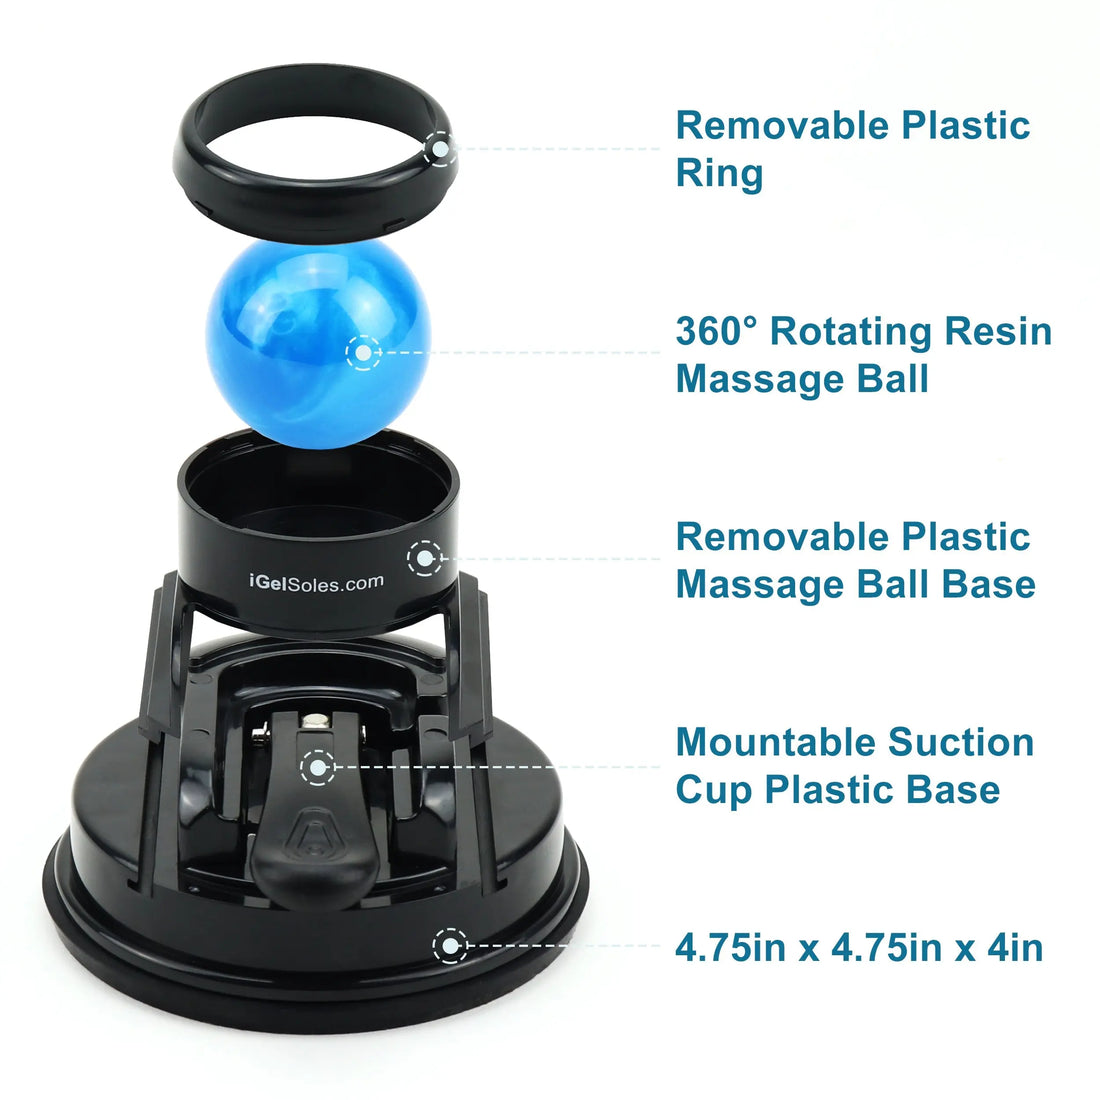 Rotating resin Mountable Massage Ball Roller with a removable plastic ring, designed for deep tissue massage and mounted on a suction cup base, labeled with dimensions and website URL. Created by Soulful Trading.